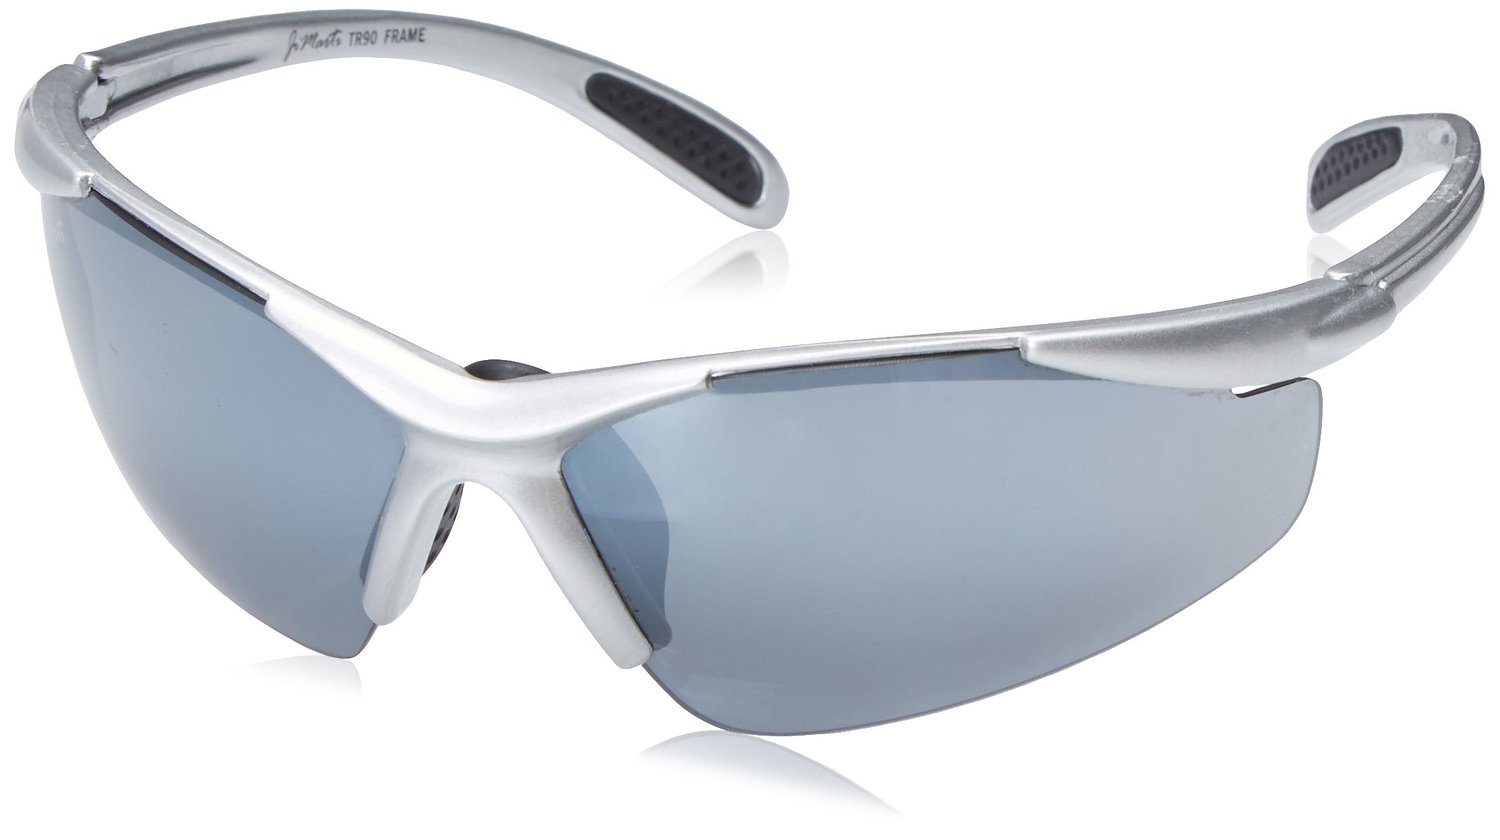 JiMarti JM01 Sunglasses for golf with unbreakable frame